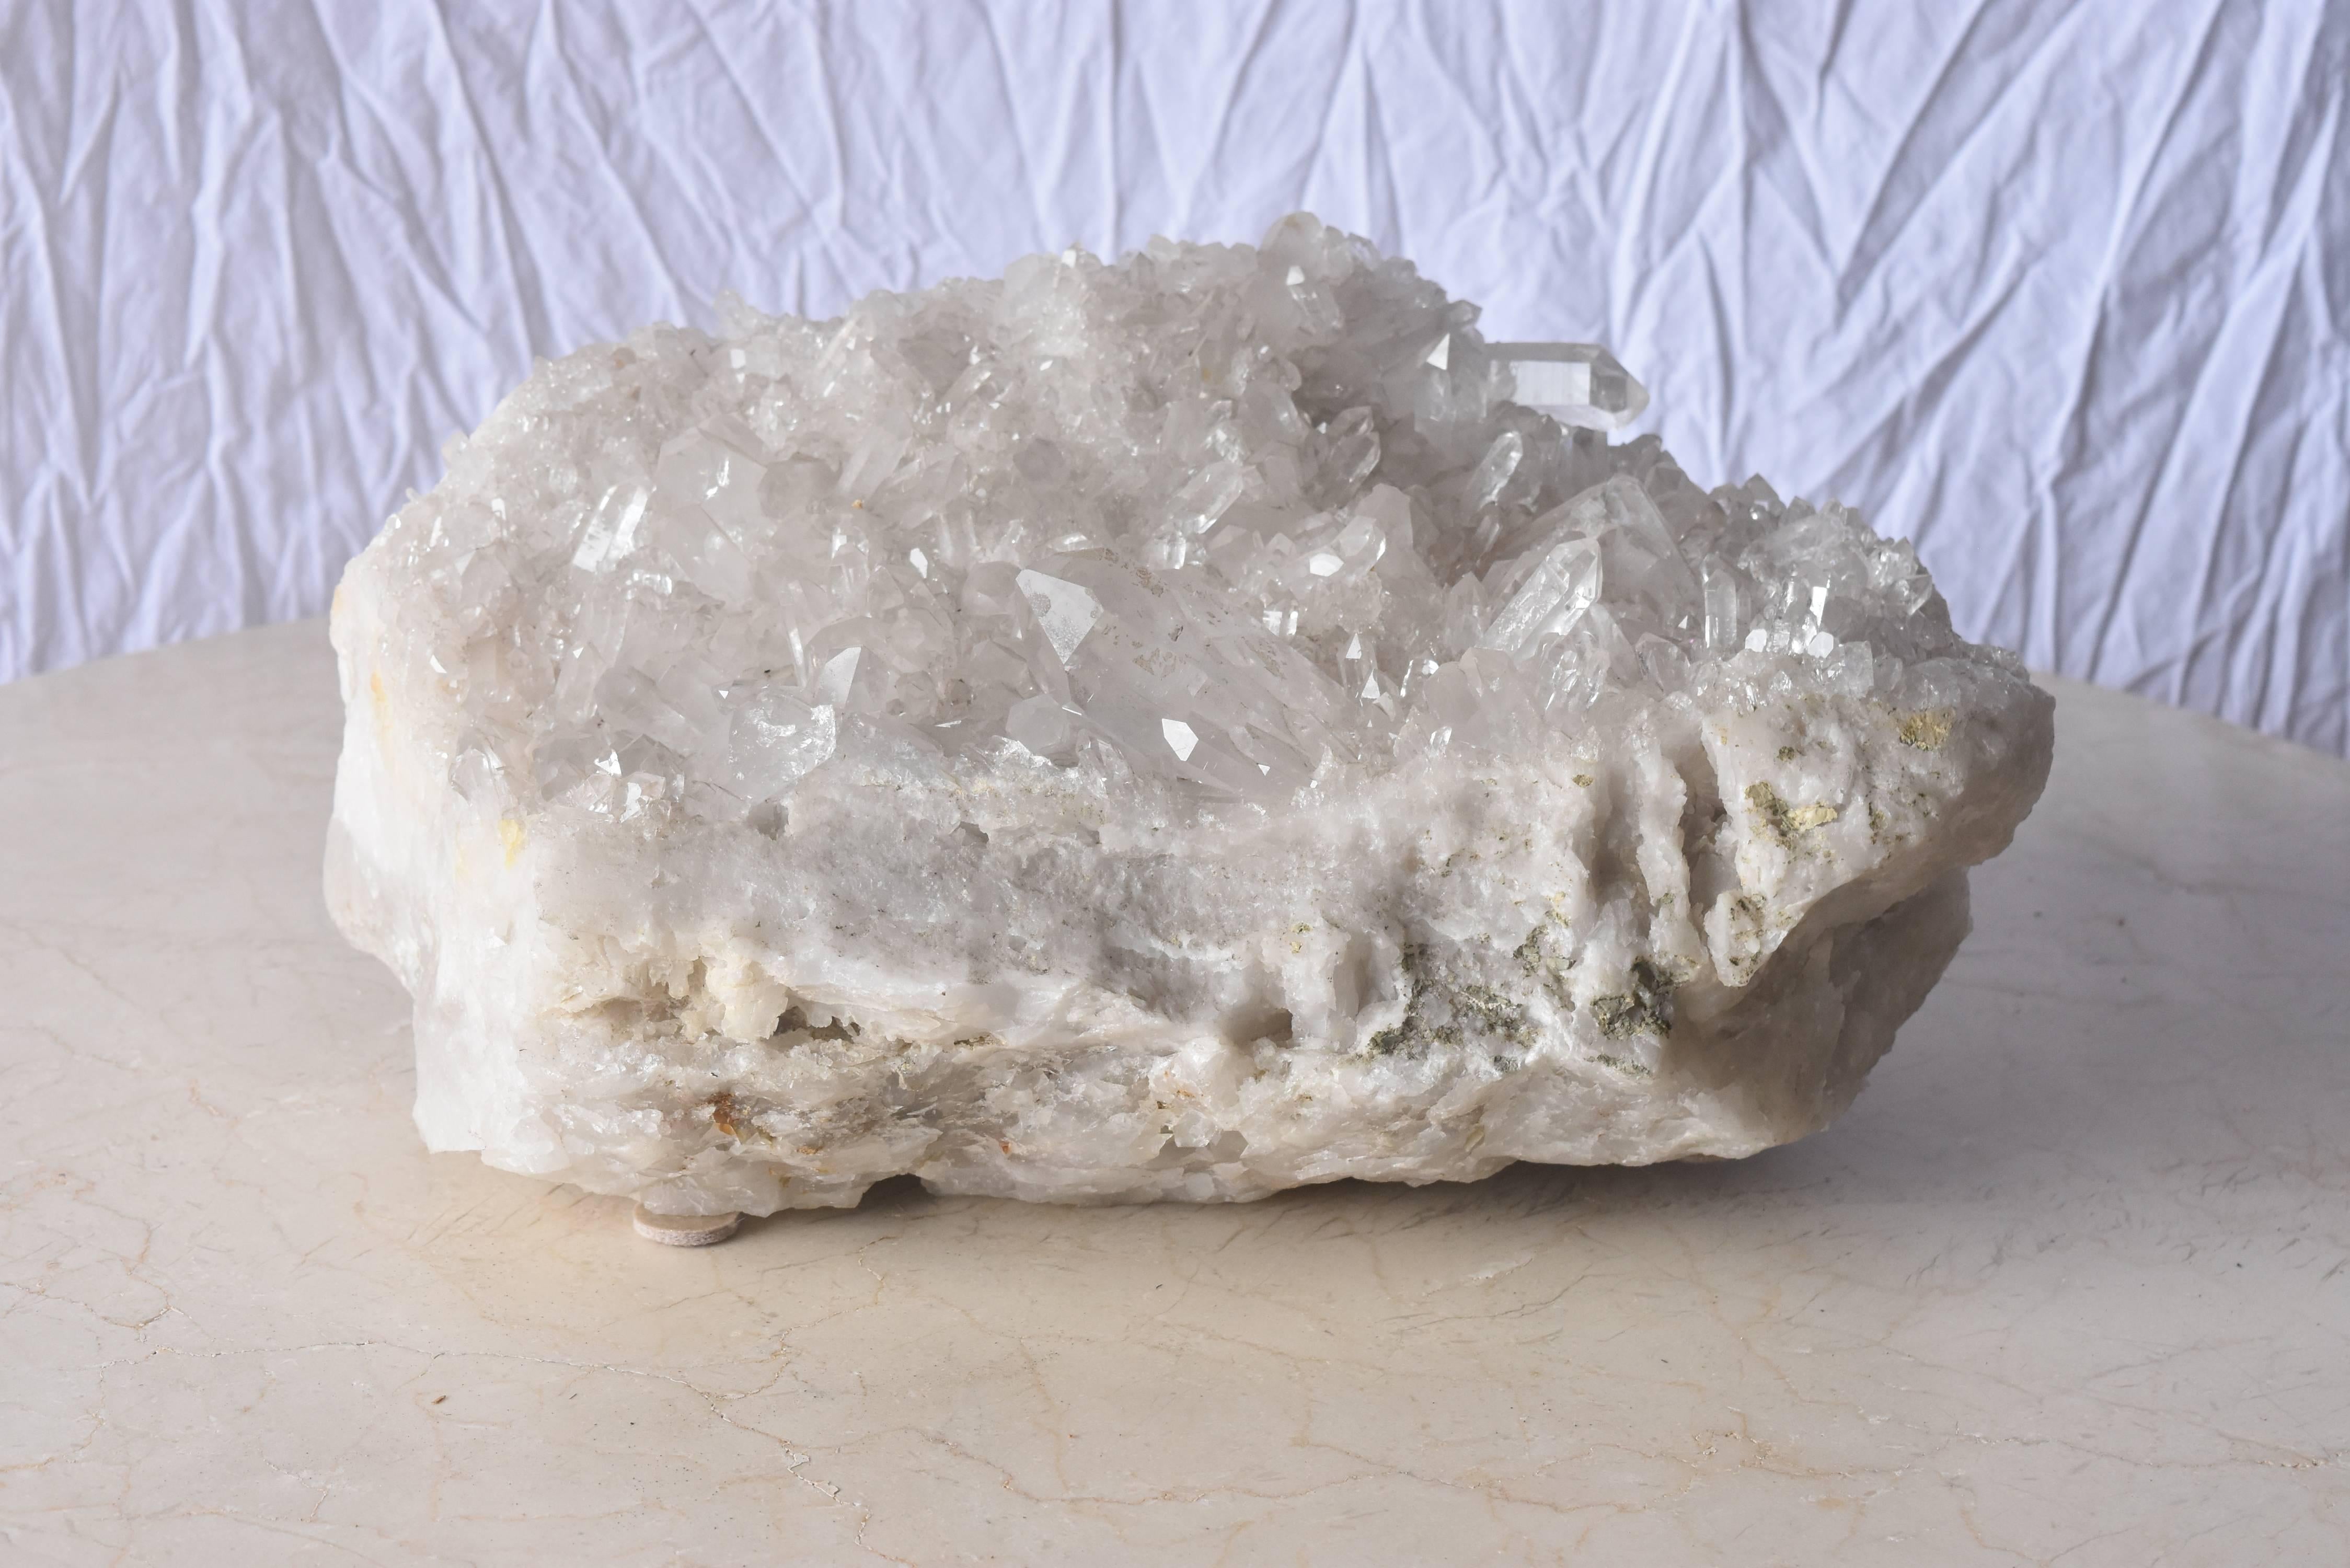 Quartz or rock crystal is known as the master healer and always great to use in decoration. This one is a wonderful coffee table or buffet piece to make a statement and give character to your room.
I am not sure of the exact date but this size can